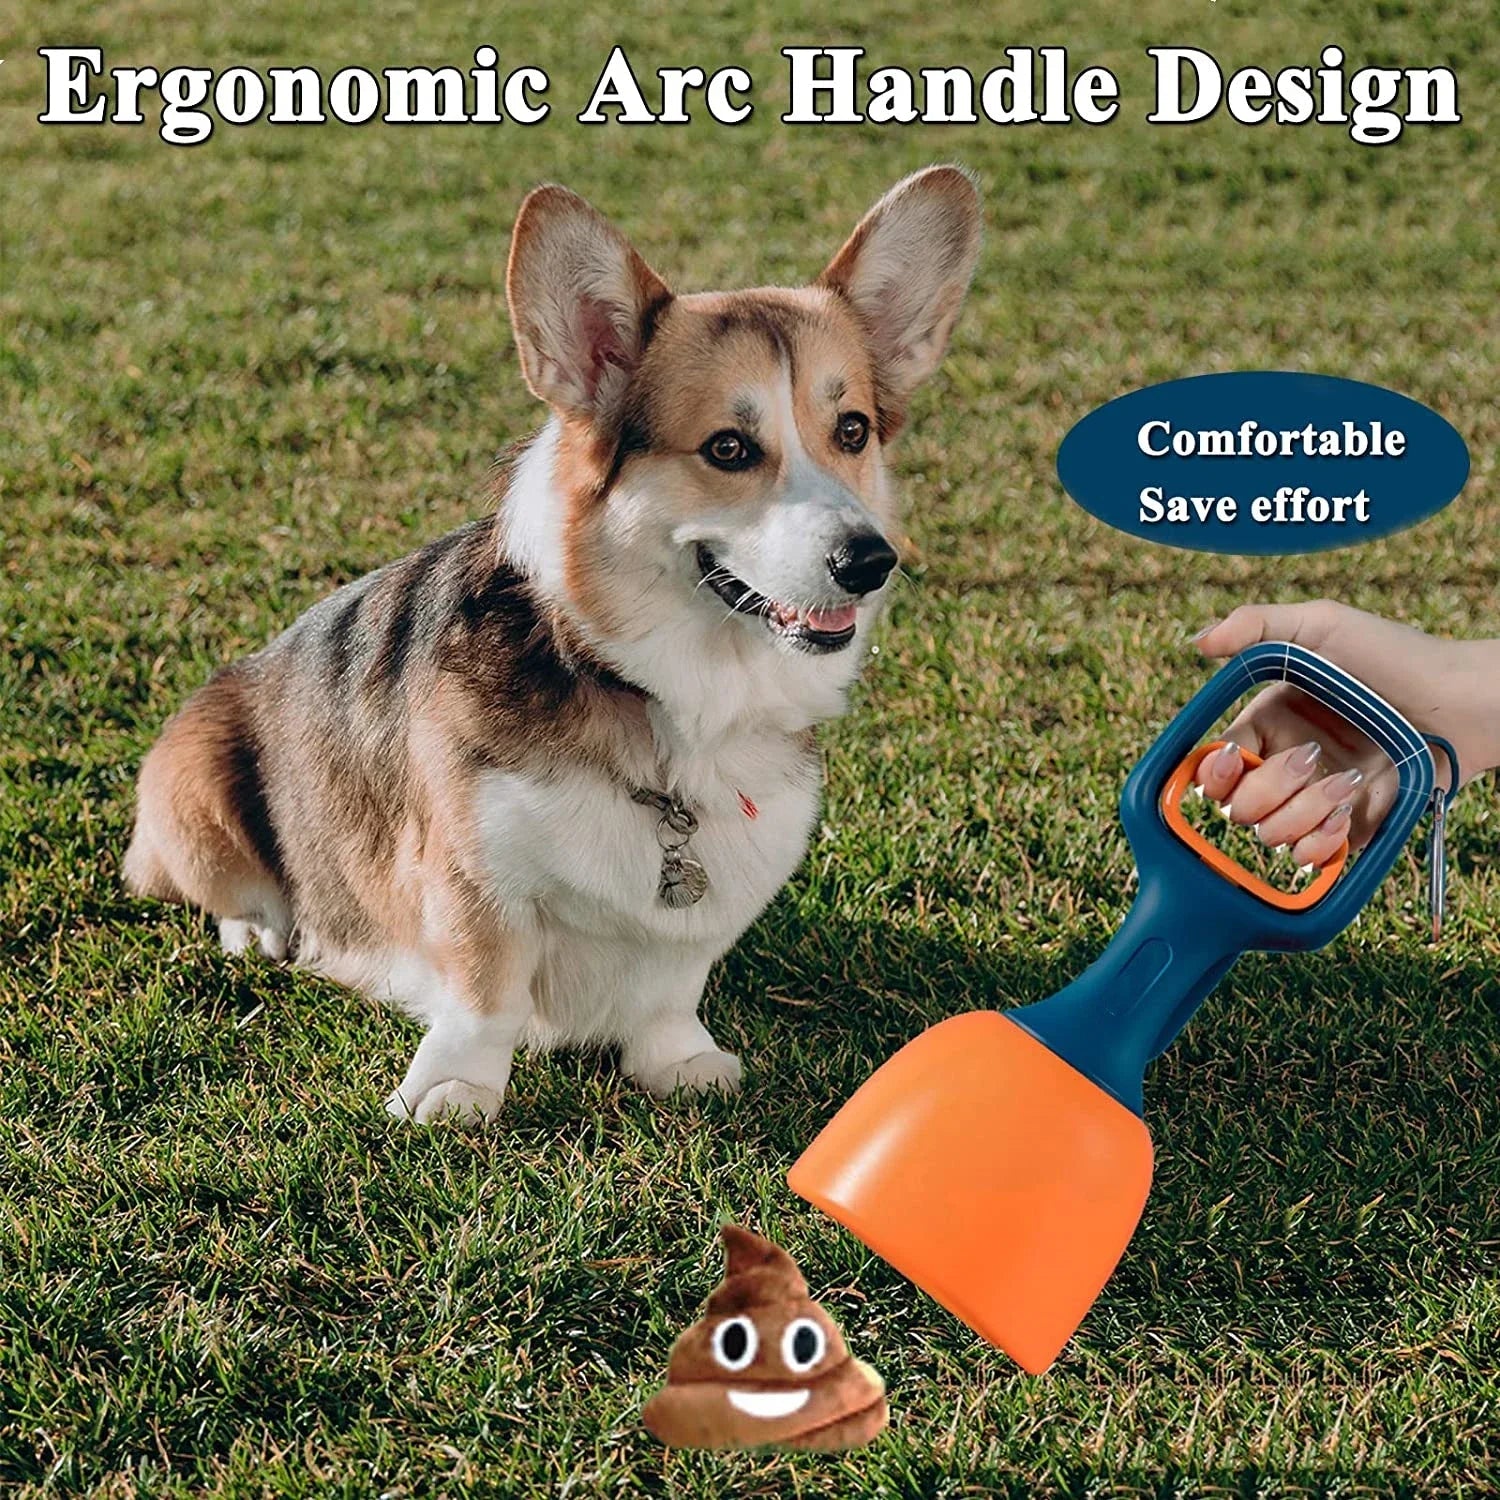 Cecuca Pet Pooper Scooper: Portable Waste Pick Up for Easy Grass & Gravel Cleaning